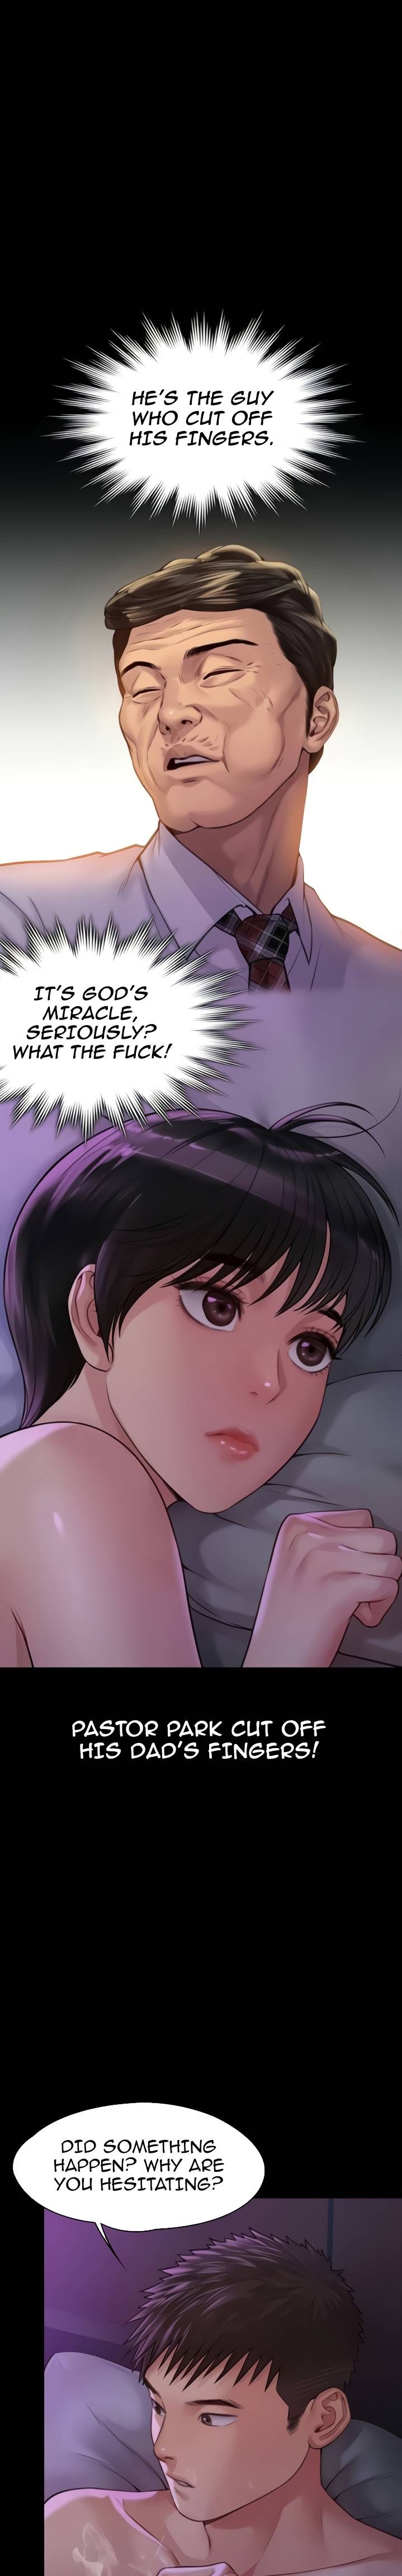 Panel Image 1 for chapter 184 of manhwa Queen Bee on read.oppai.stream